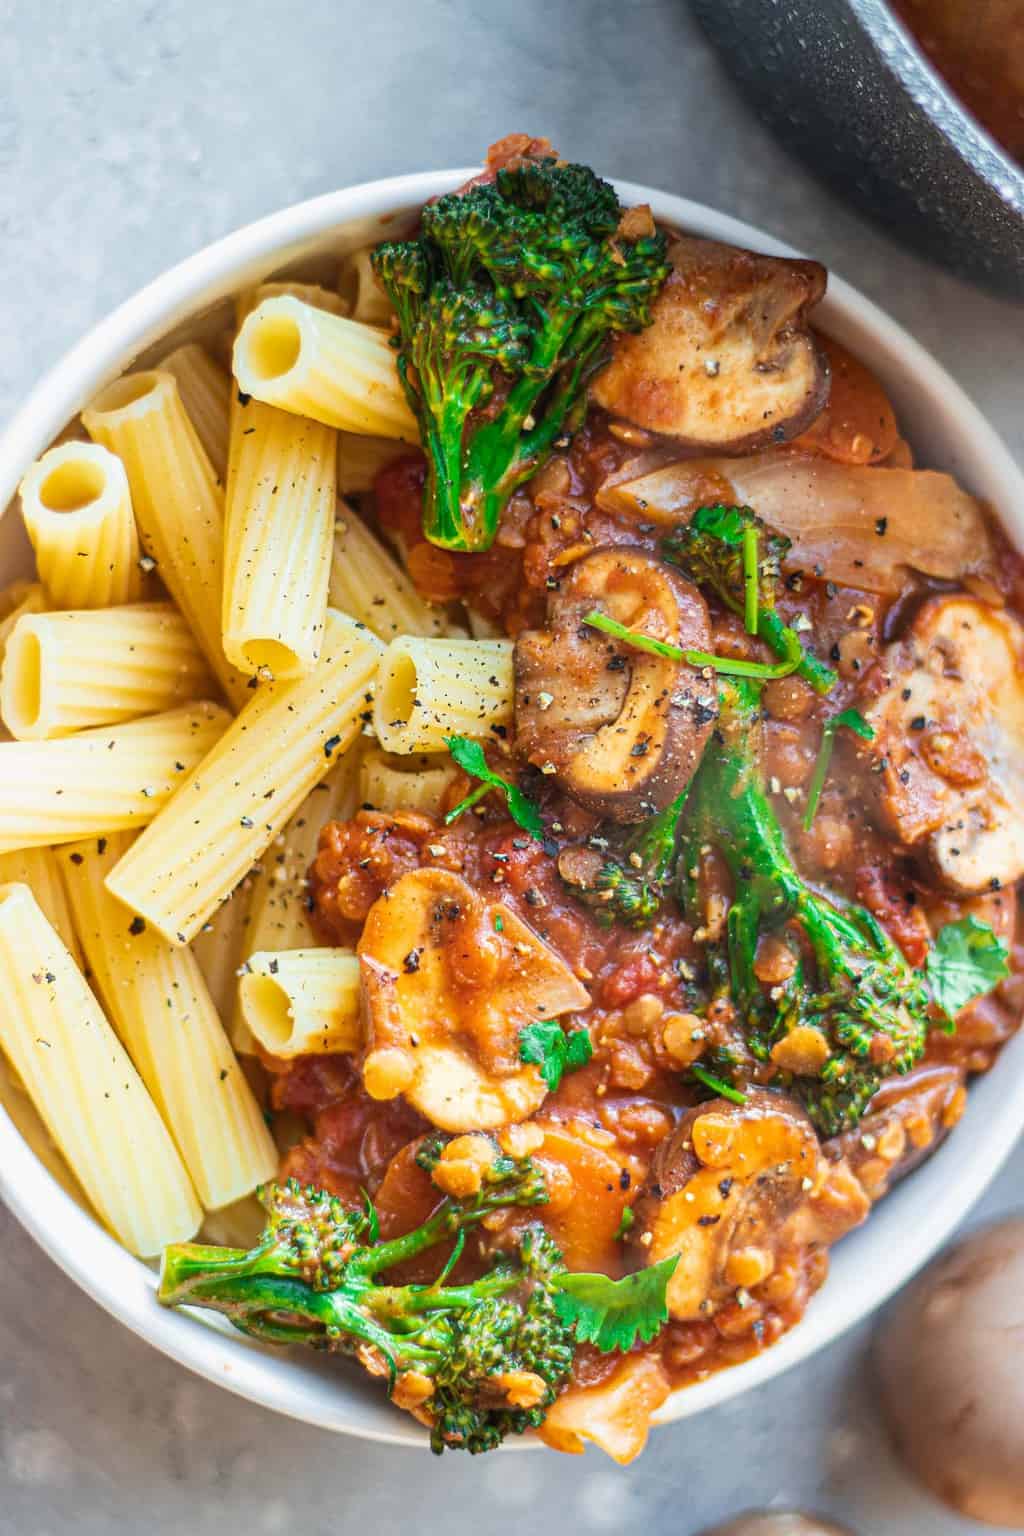 Vegan bolognese with broccoli and mushrooms in a white bowl